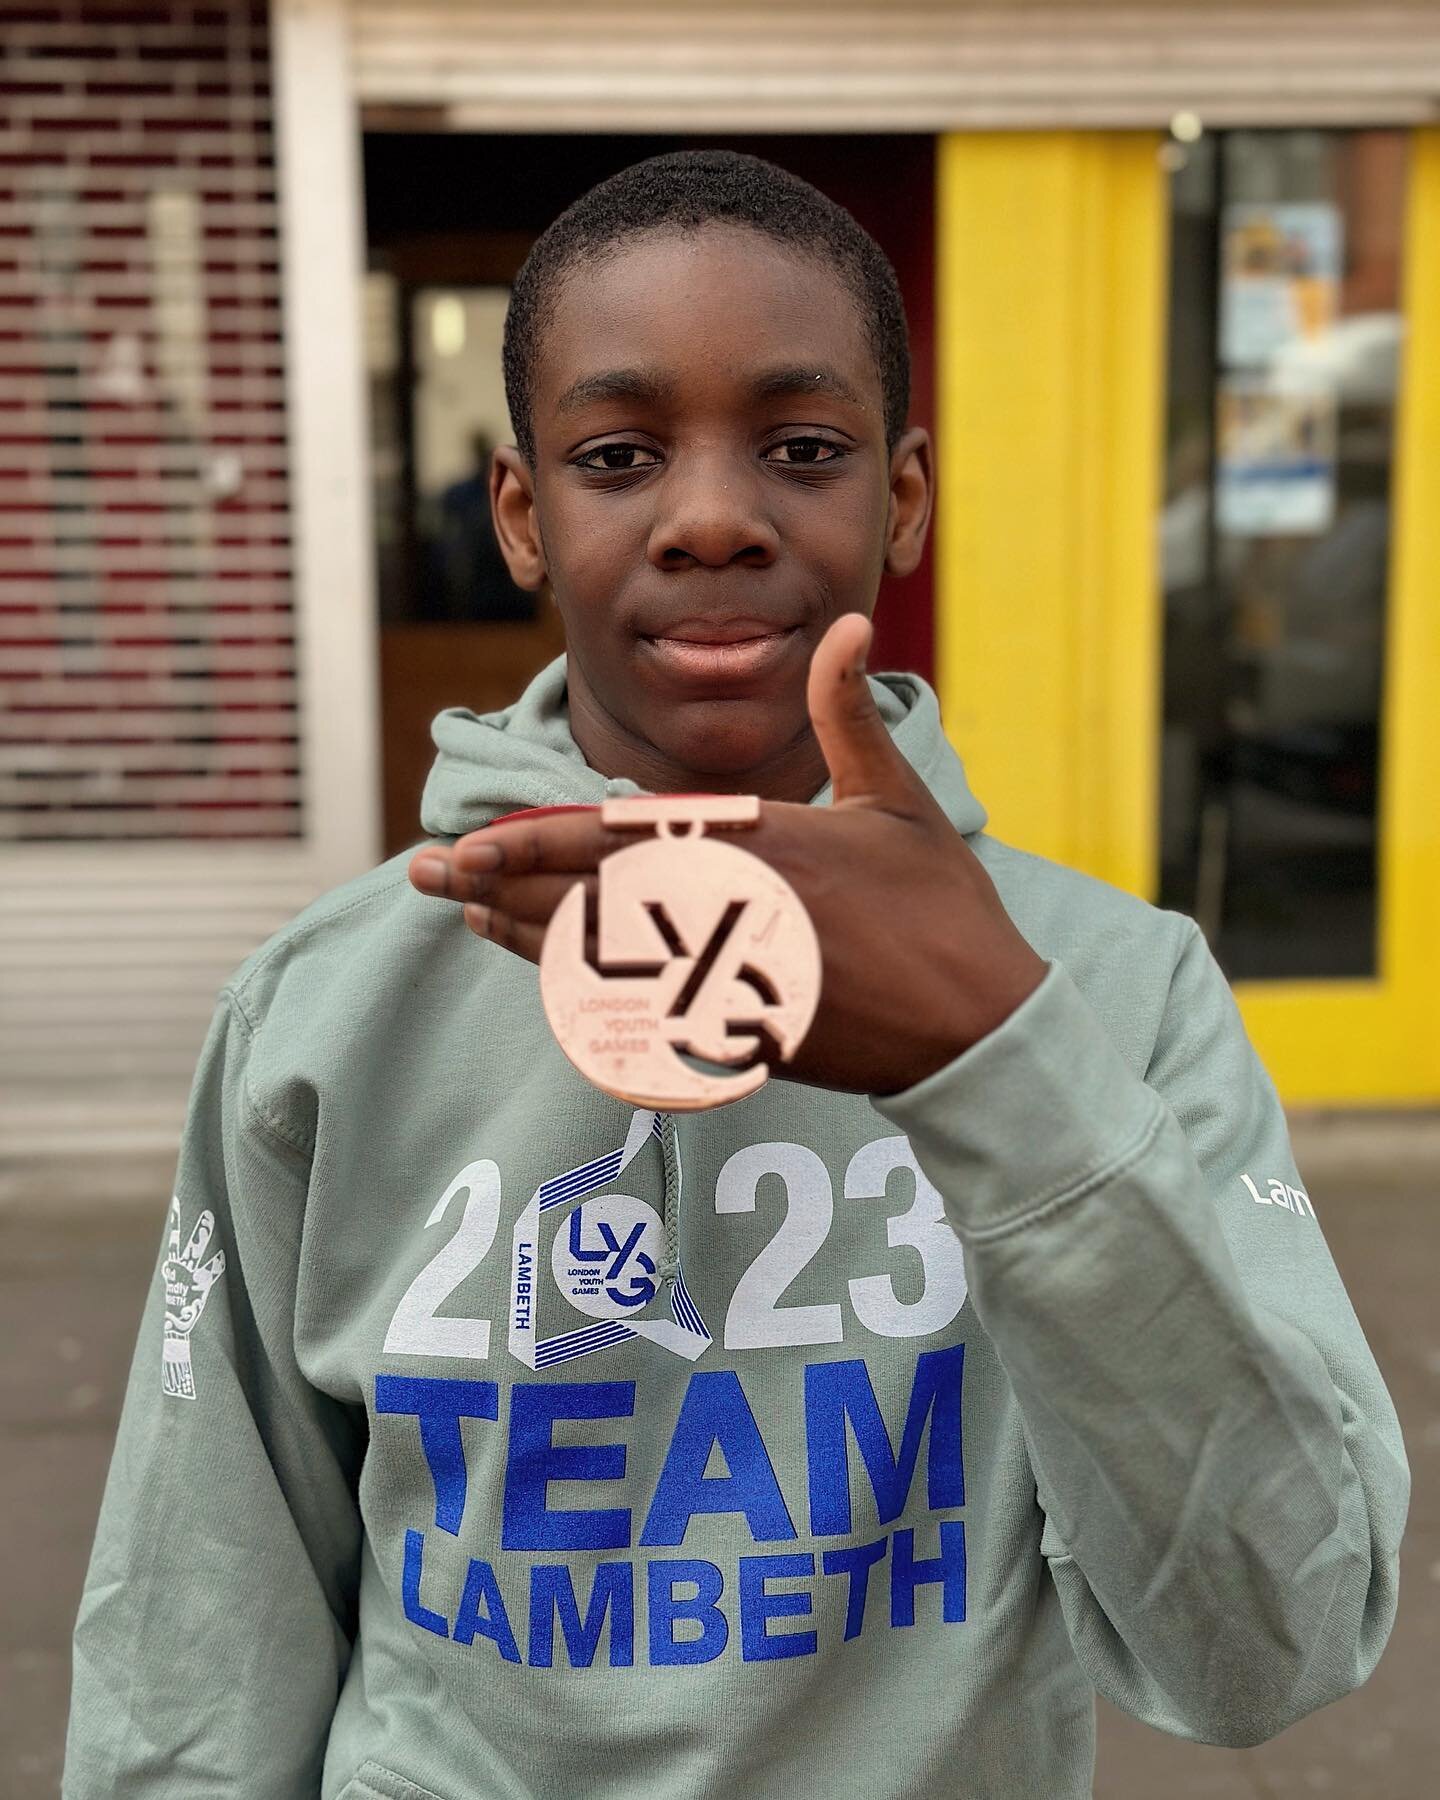 🏅Bling, 🏅Bling, Indoor Rowing is our thing!🏅

A massive Congratulations to one of our most consistent participants Duvar Darko for his Bronze Medal at the 2023 London Youth Games Indoor Rowing. 

Thank you to our coaches at @londonyouthrowing 

Ke